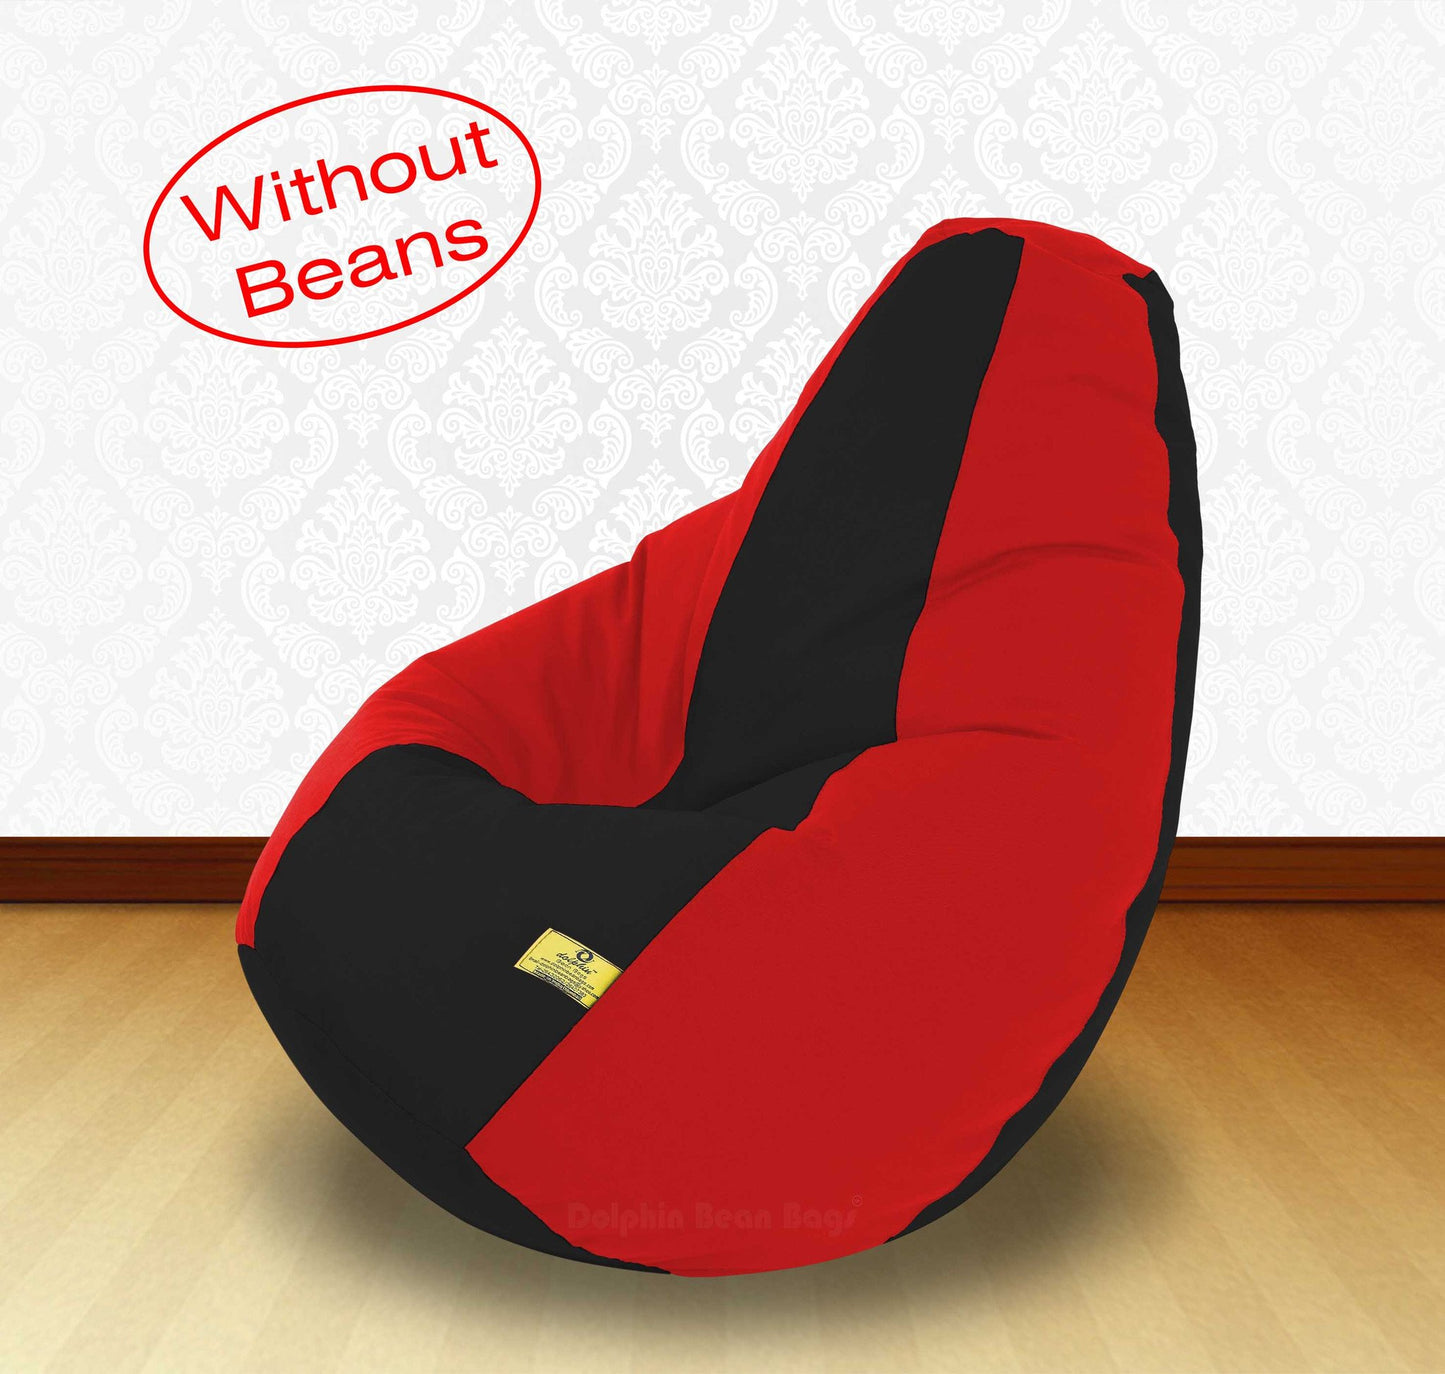 Bean Bag XXL BLACK RED-FABRIC-COVERS(WITHOUT BEANS)